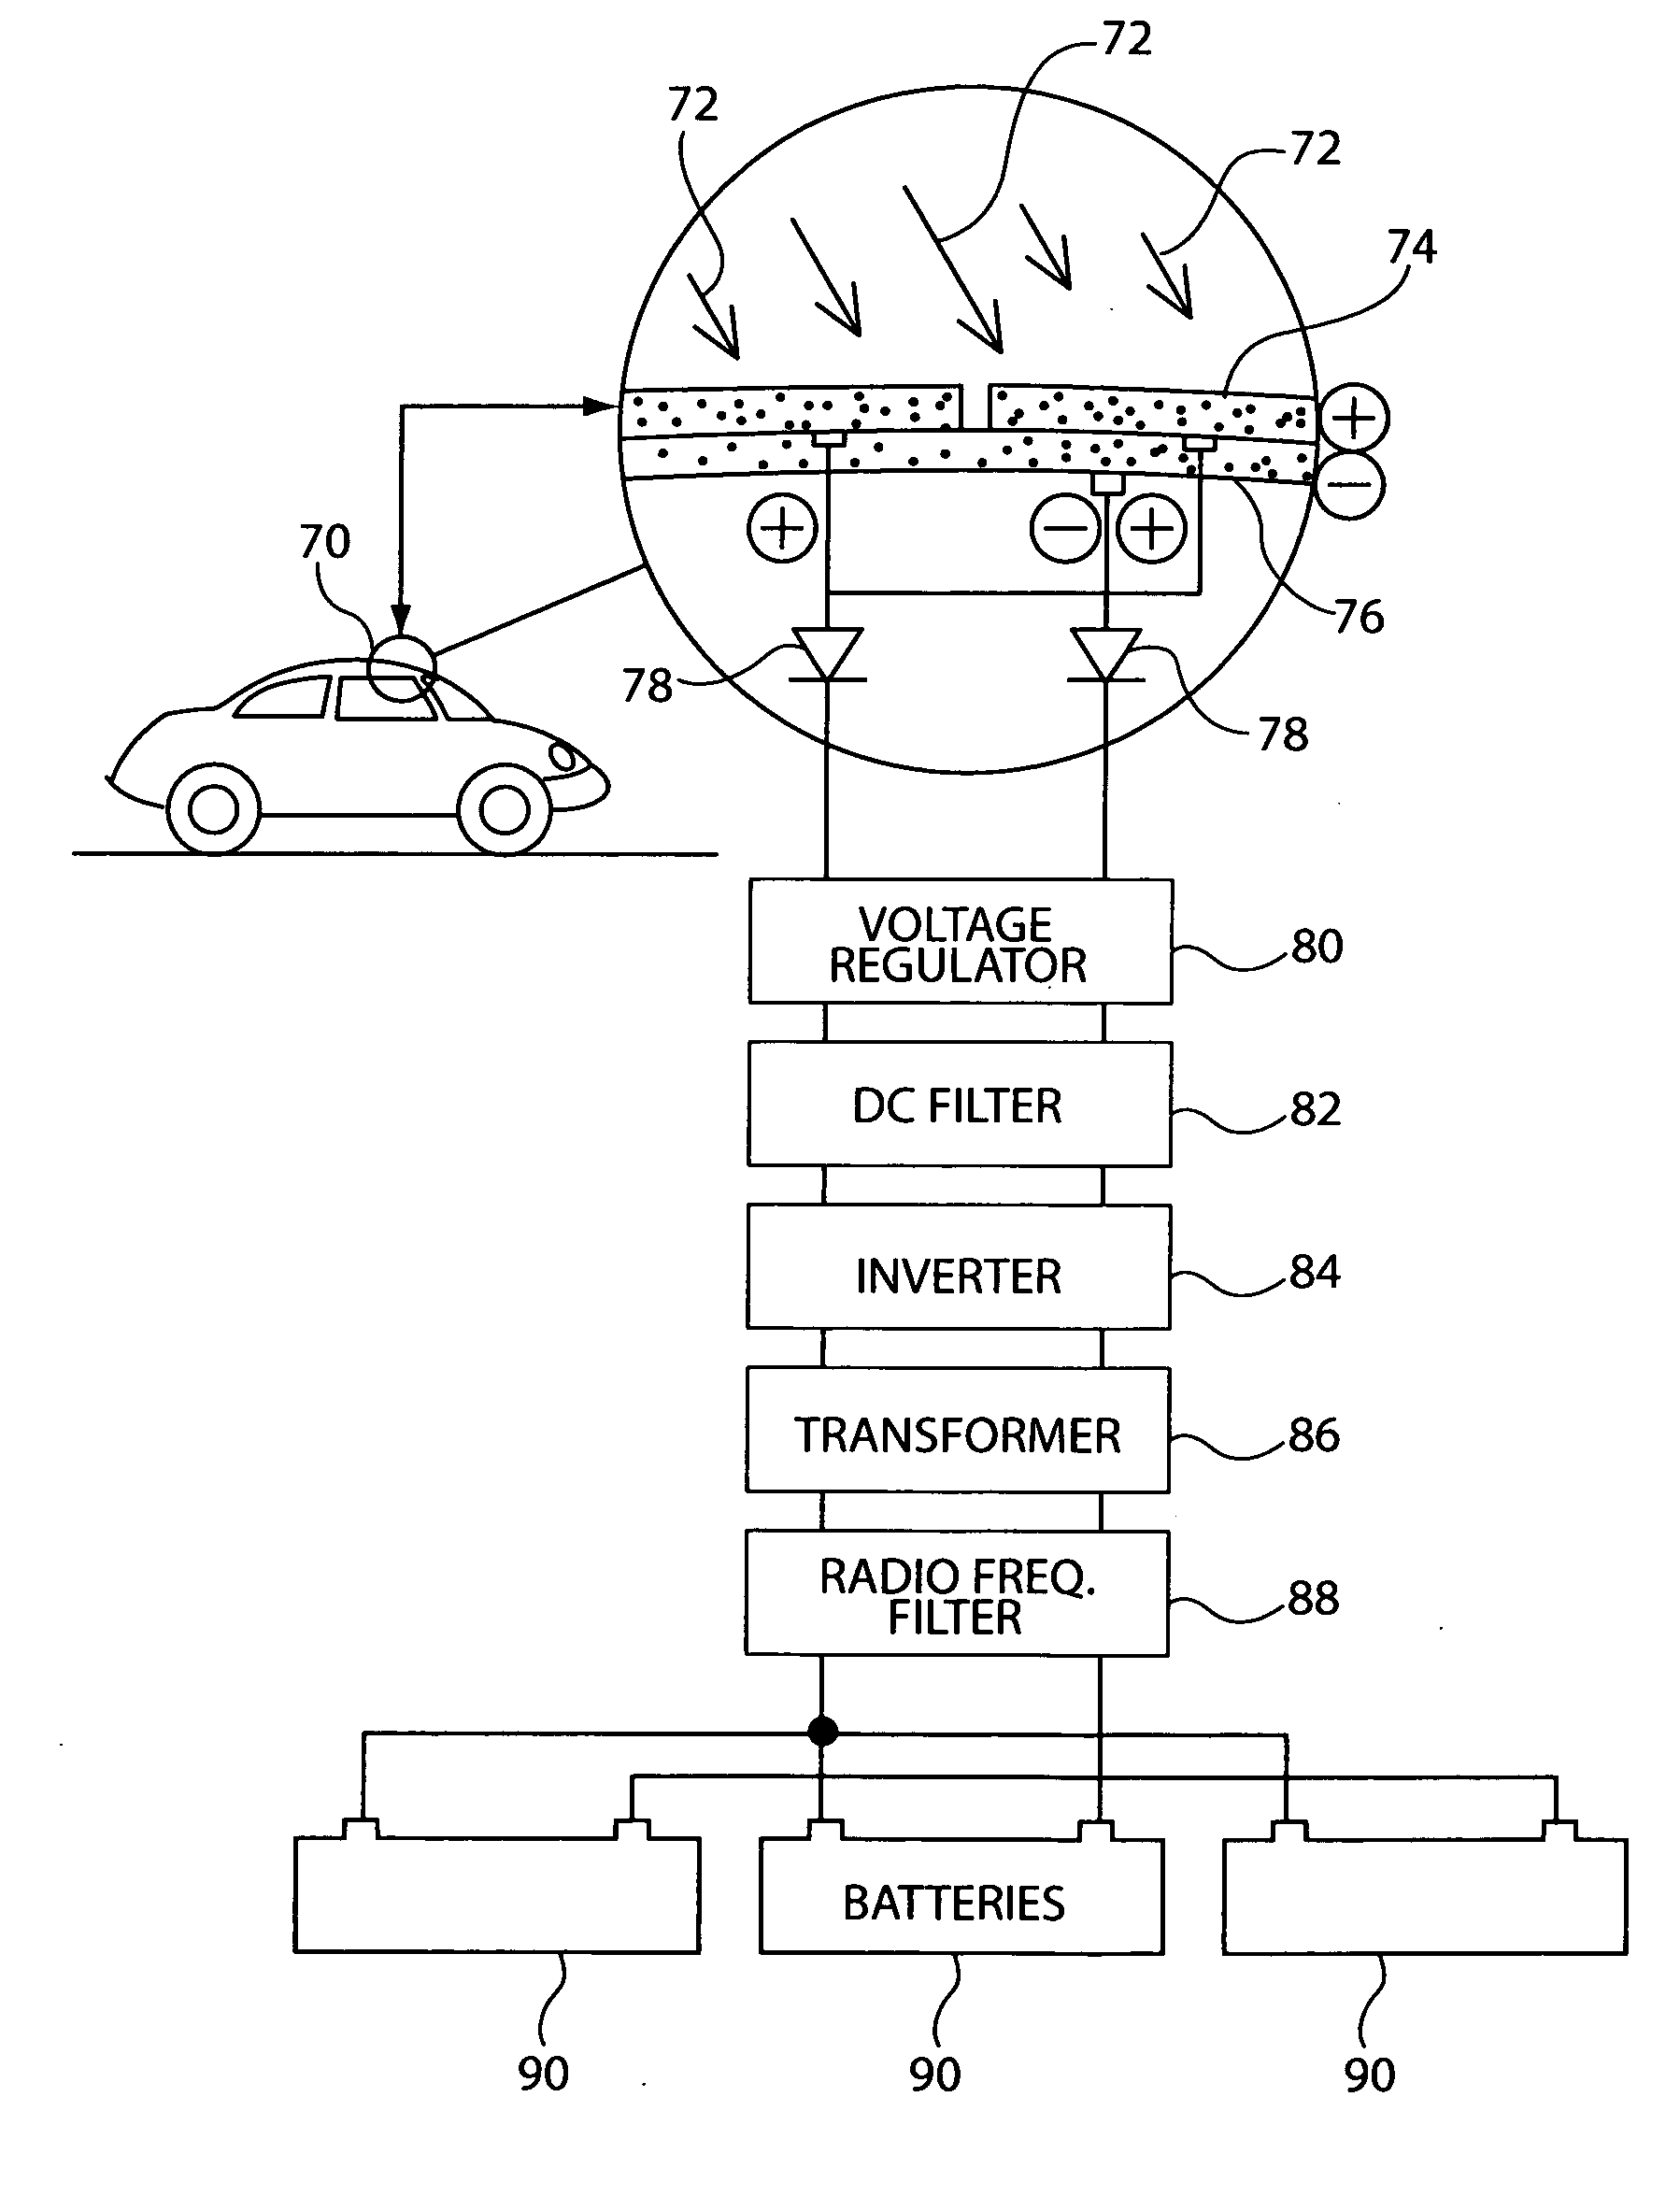 Hybrid automotive vehicle with solar battery charging